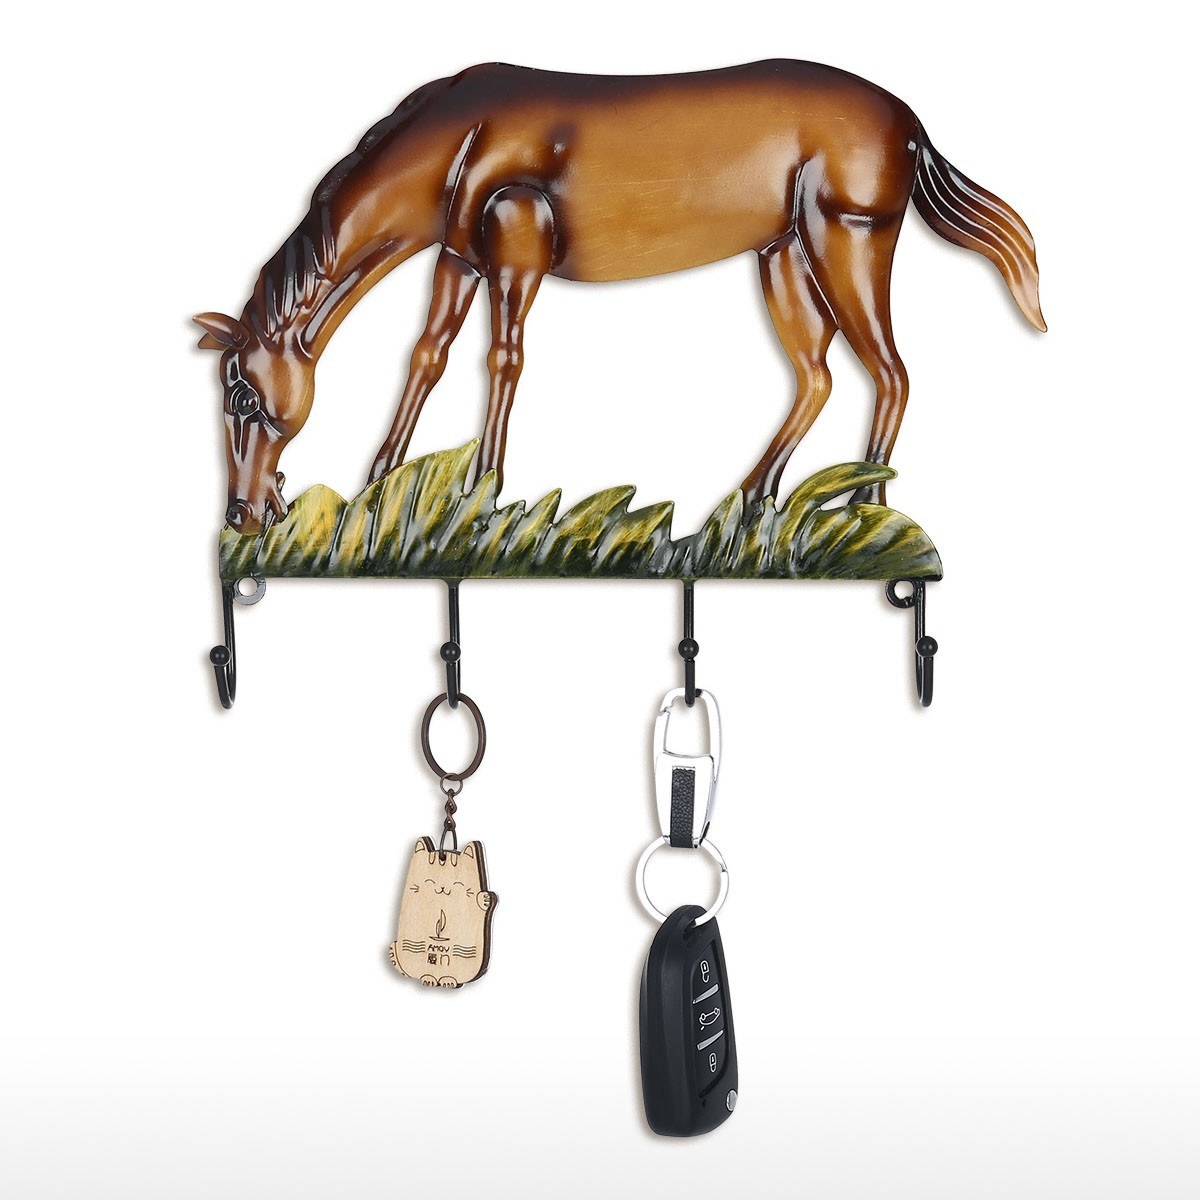 You'll finally have a place to hang your things and this beautiful horse-themed wall hook and hanger is just what you need